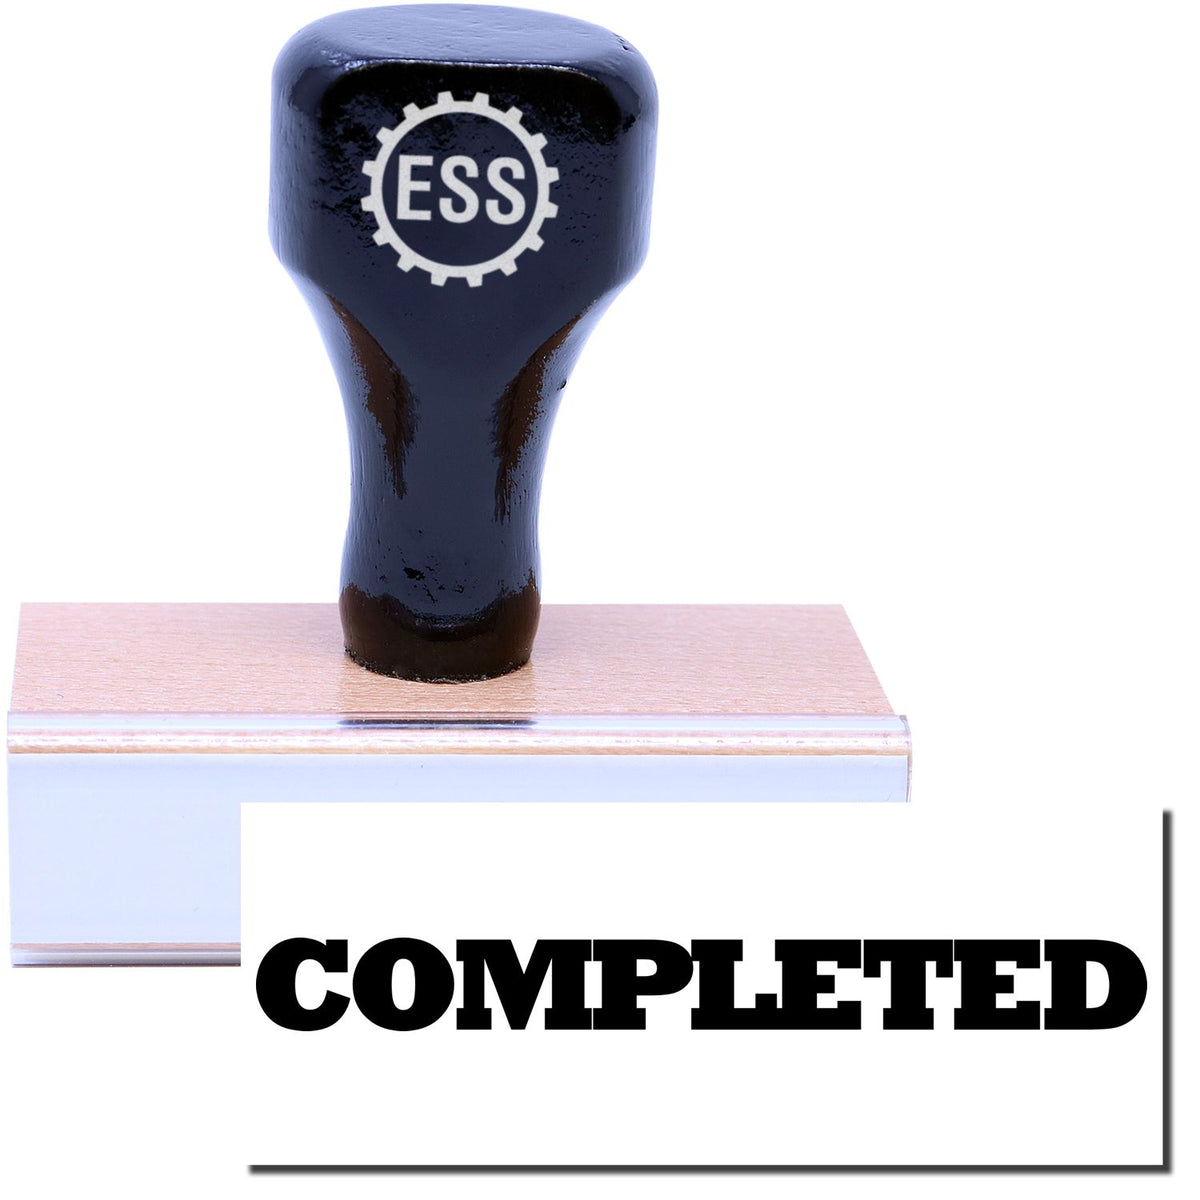 A stock office rubber stamp with a stamped image showing how the text &quot;COMPLETED&quot; in a large bold font is displayed after stamping.